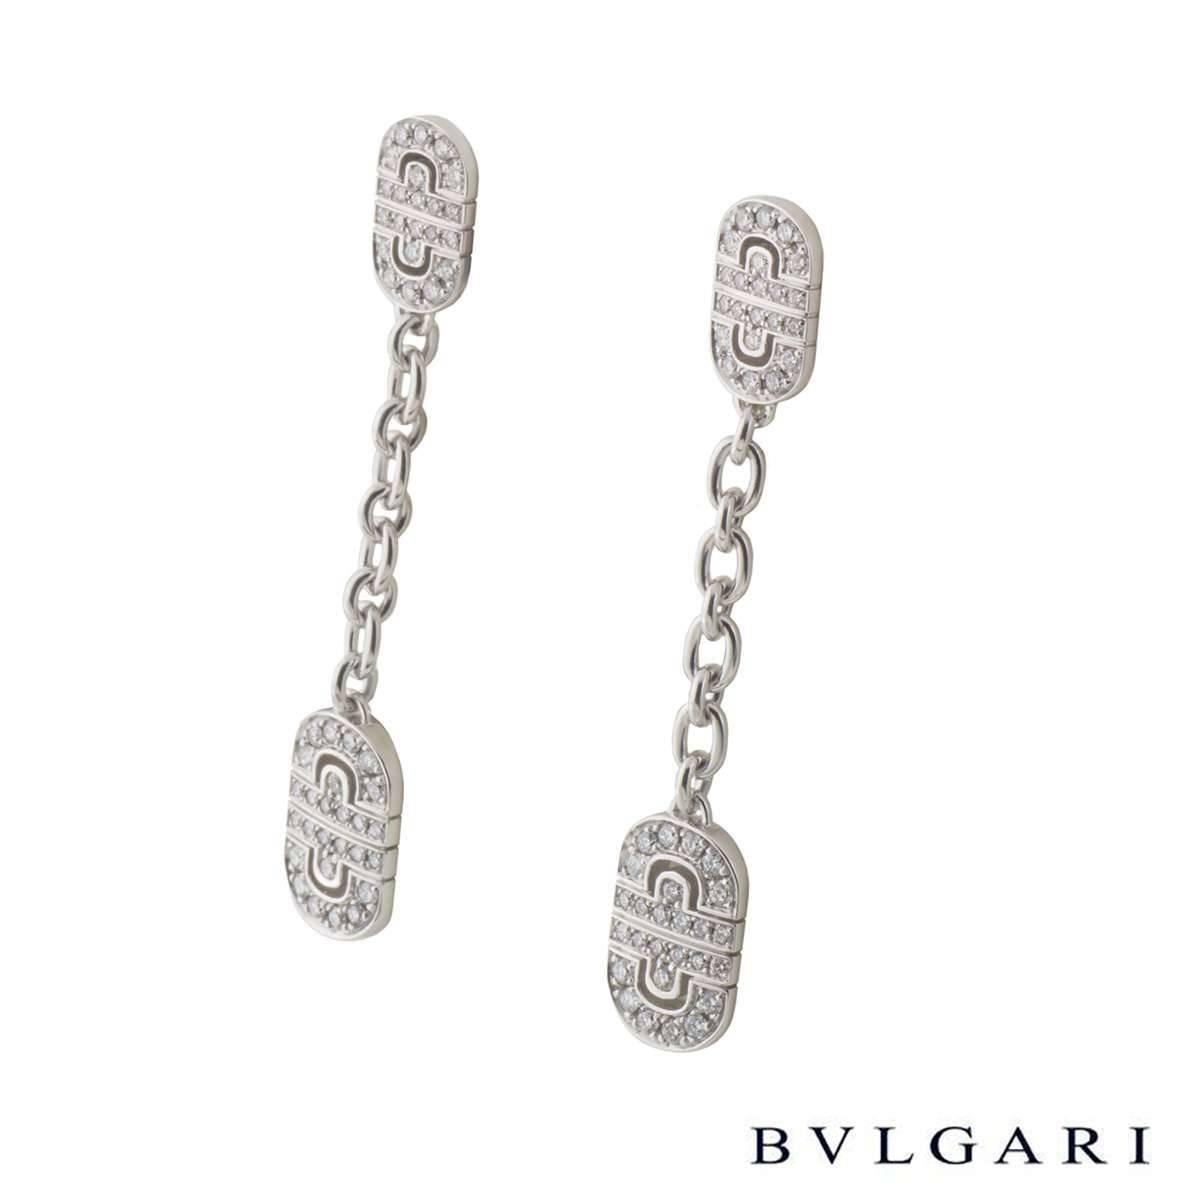 A pair of 18k white gold earrings from the Parentesi collection by Bulgari. The drop earrings are composed of two diamond set panels featuring a geometric design suspended from each other. The earrings are set with pave round brilliant cut diamonds